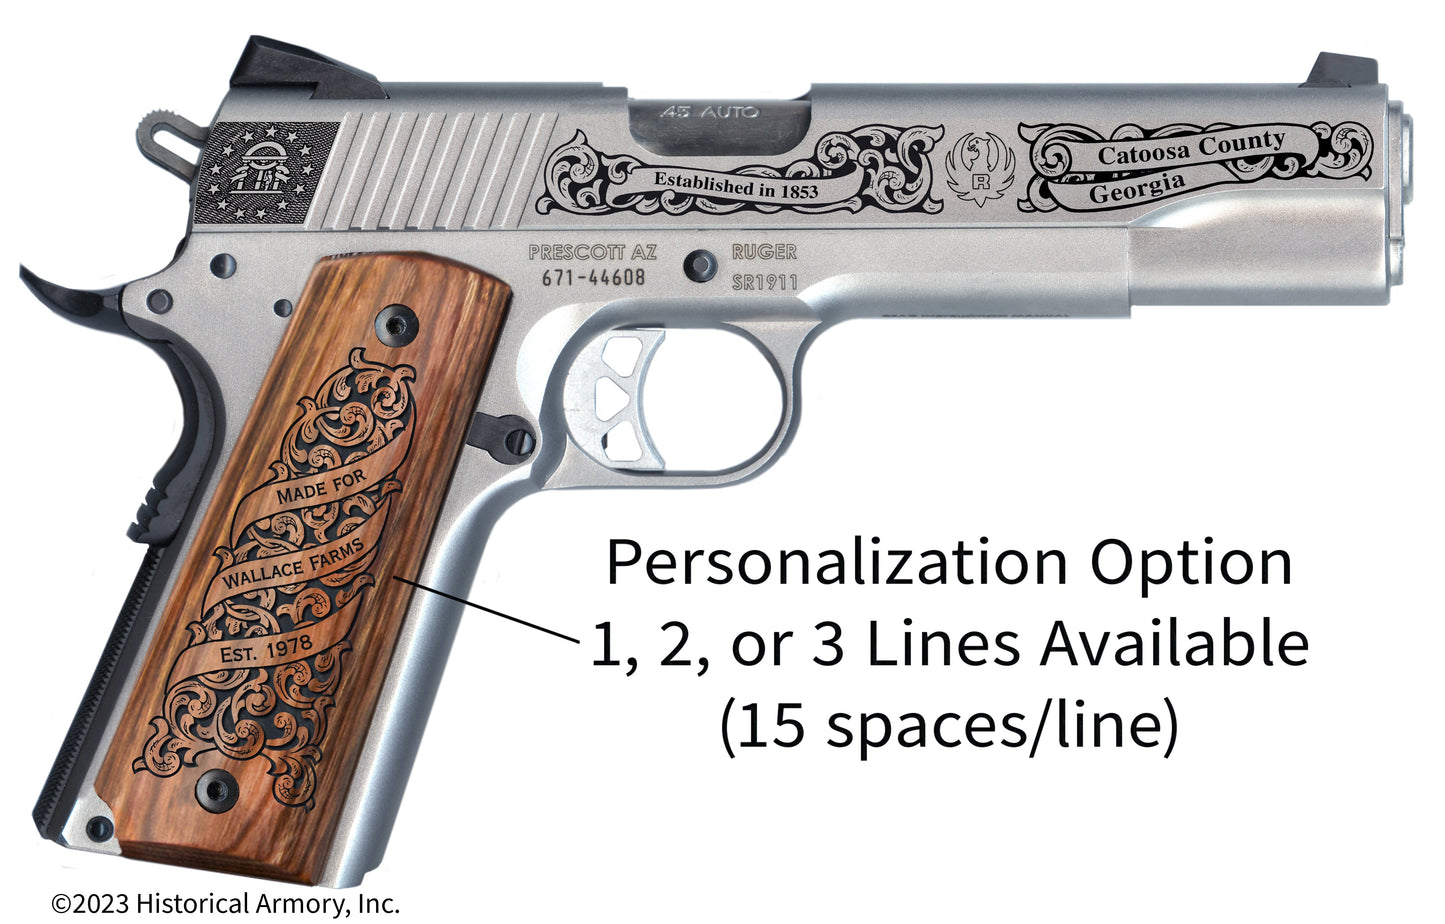 Catoosa County Georgia Personalized Engraved .45 Auto Ruger 1911